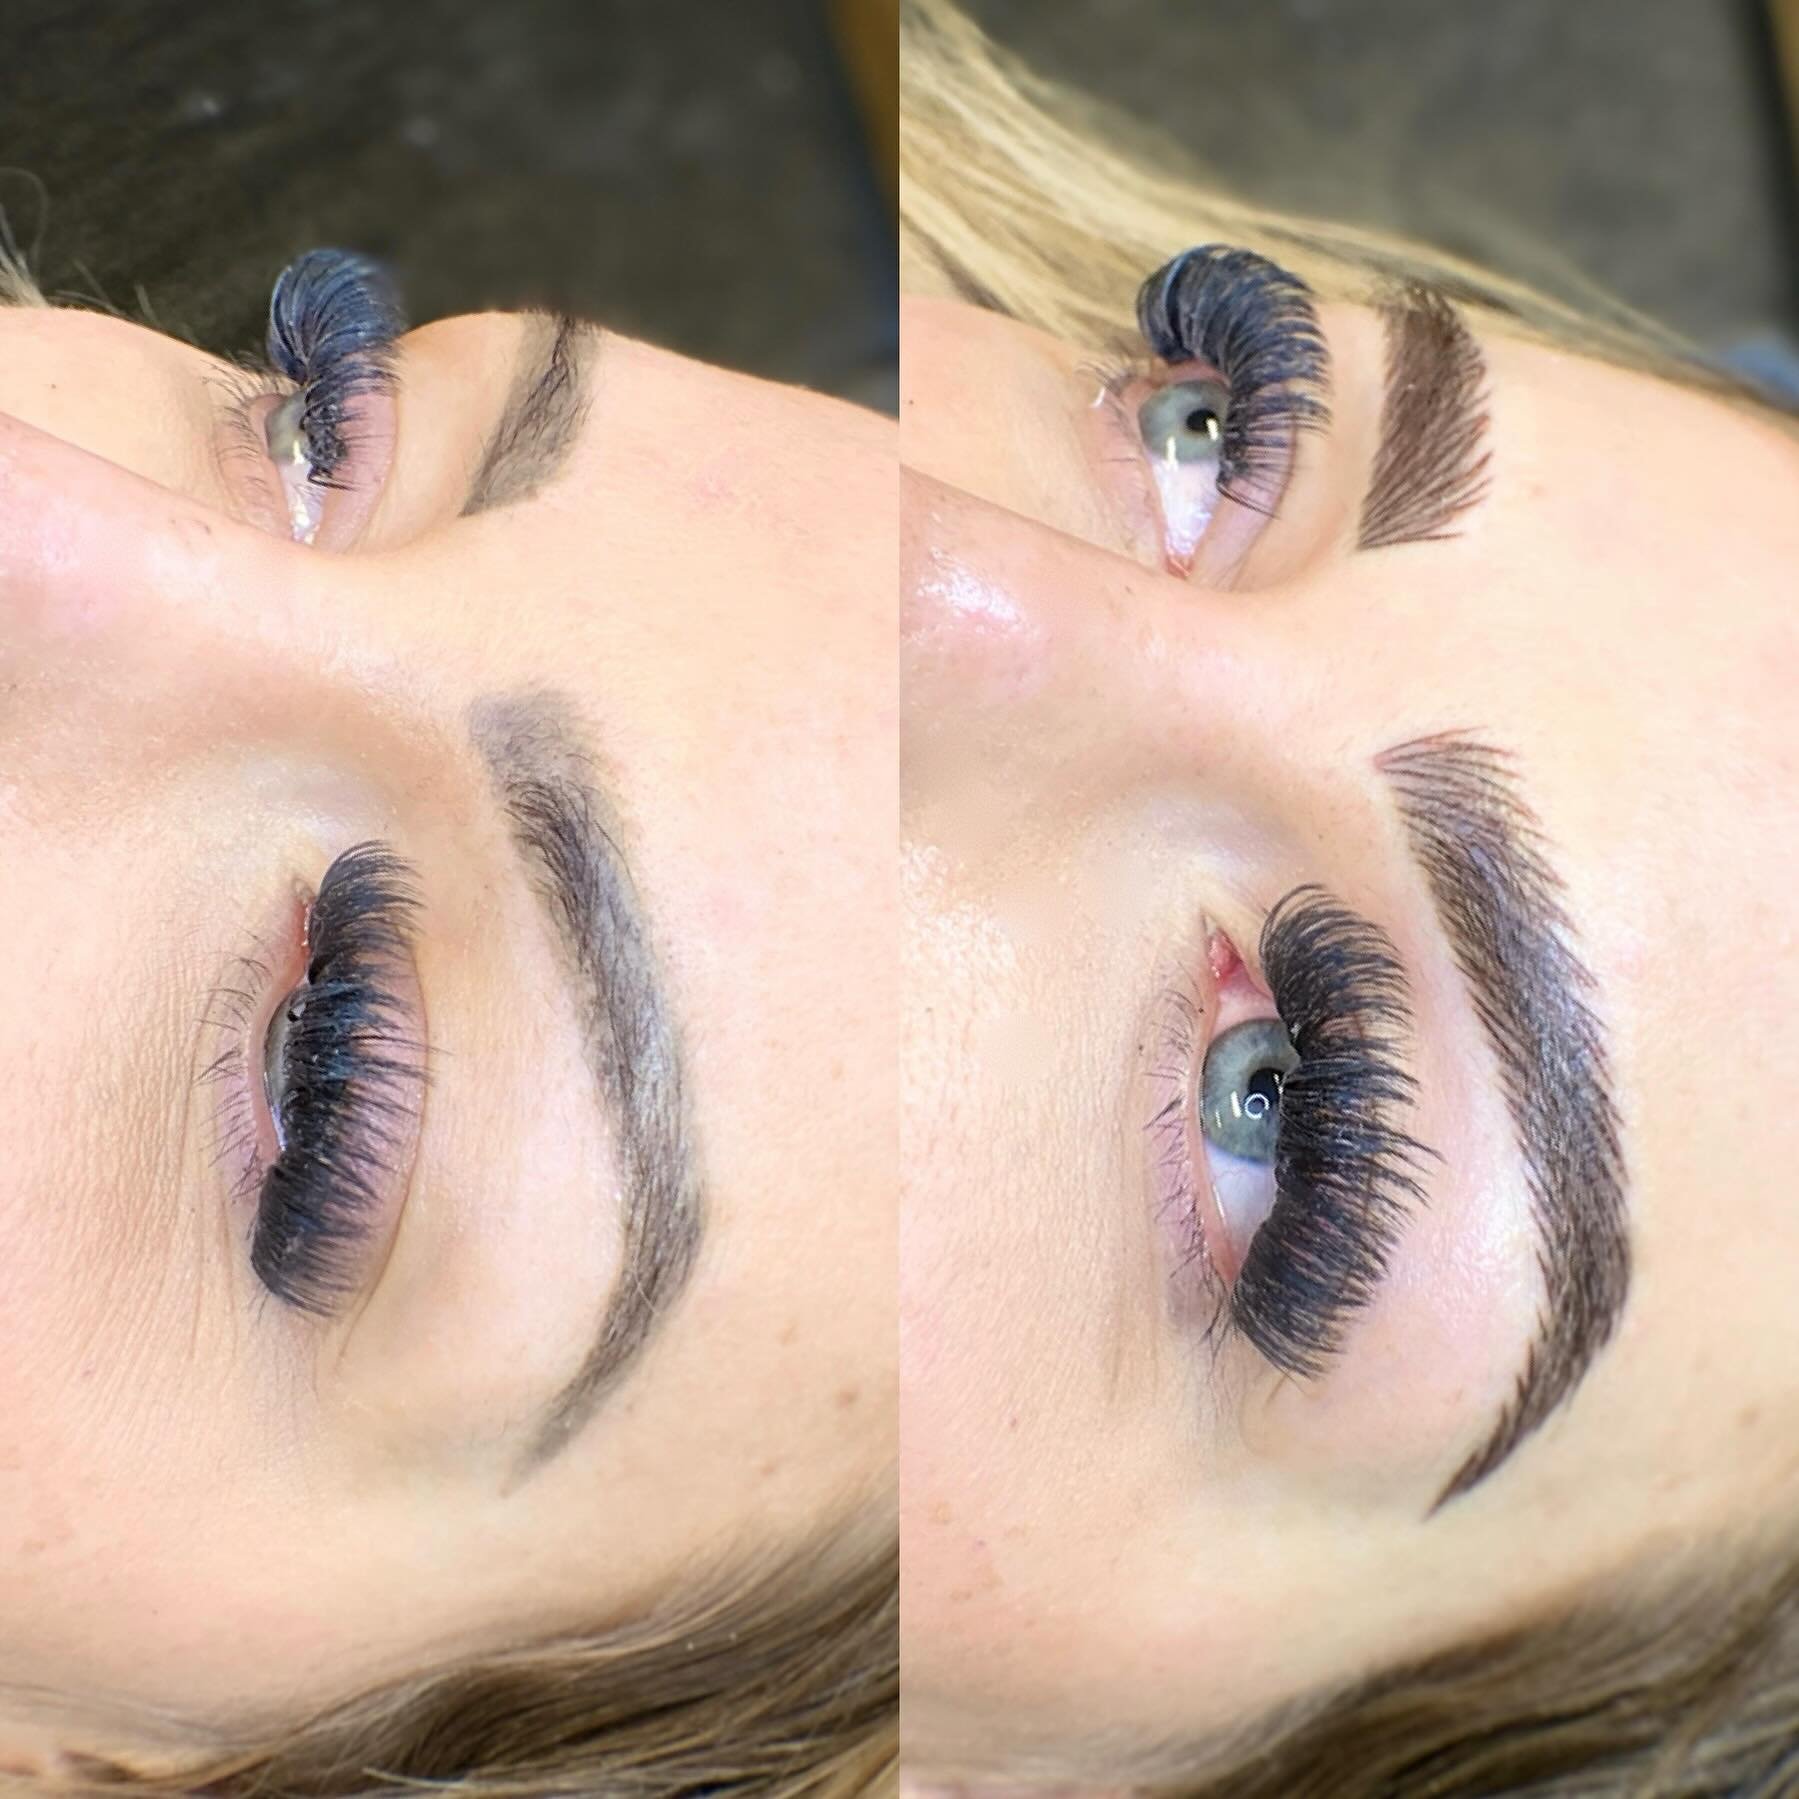 Just fluffin&rsquo; things up over here 🤗 

www.lashiousstudio.com

#nanobrows #brows #pmubrows #yxebrows #coverup #permanentmakeup #cosmetictattoo #yxetattoos #browartist #pmuartist